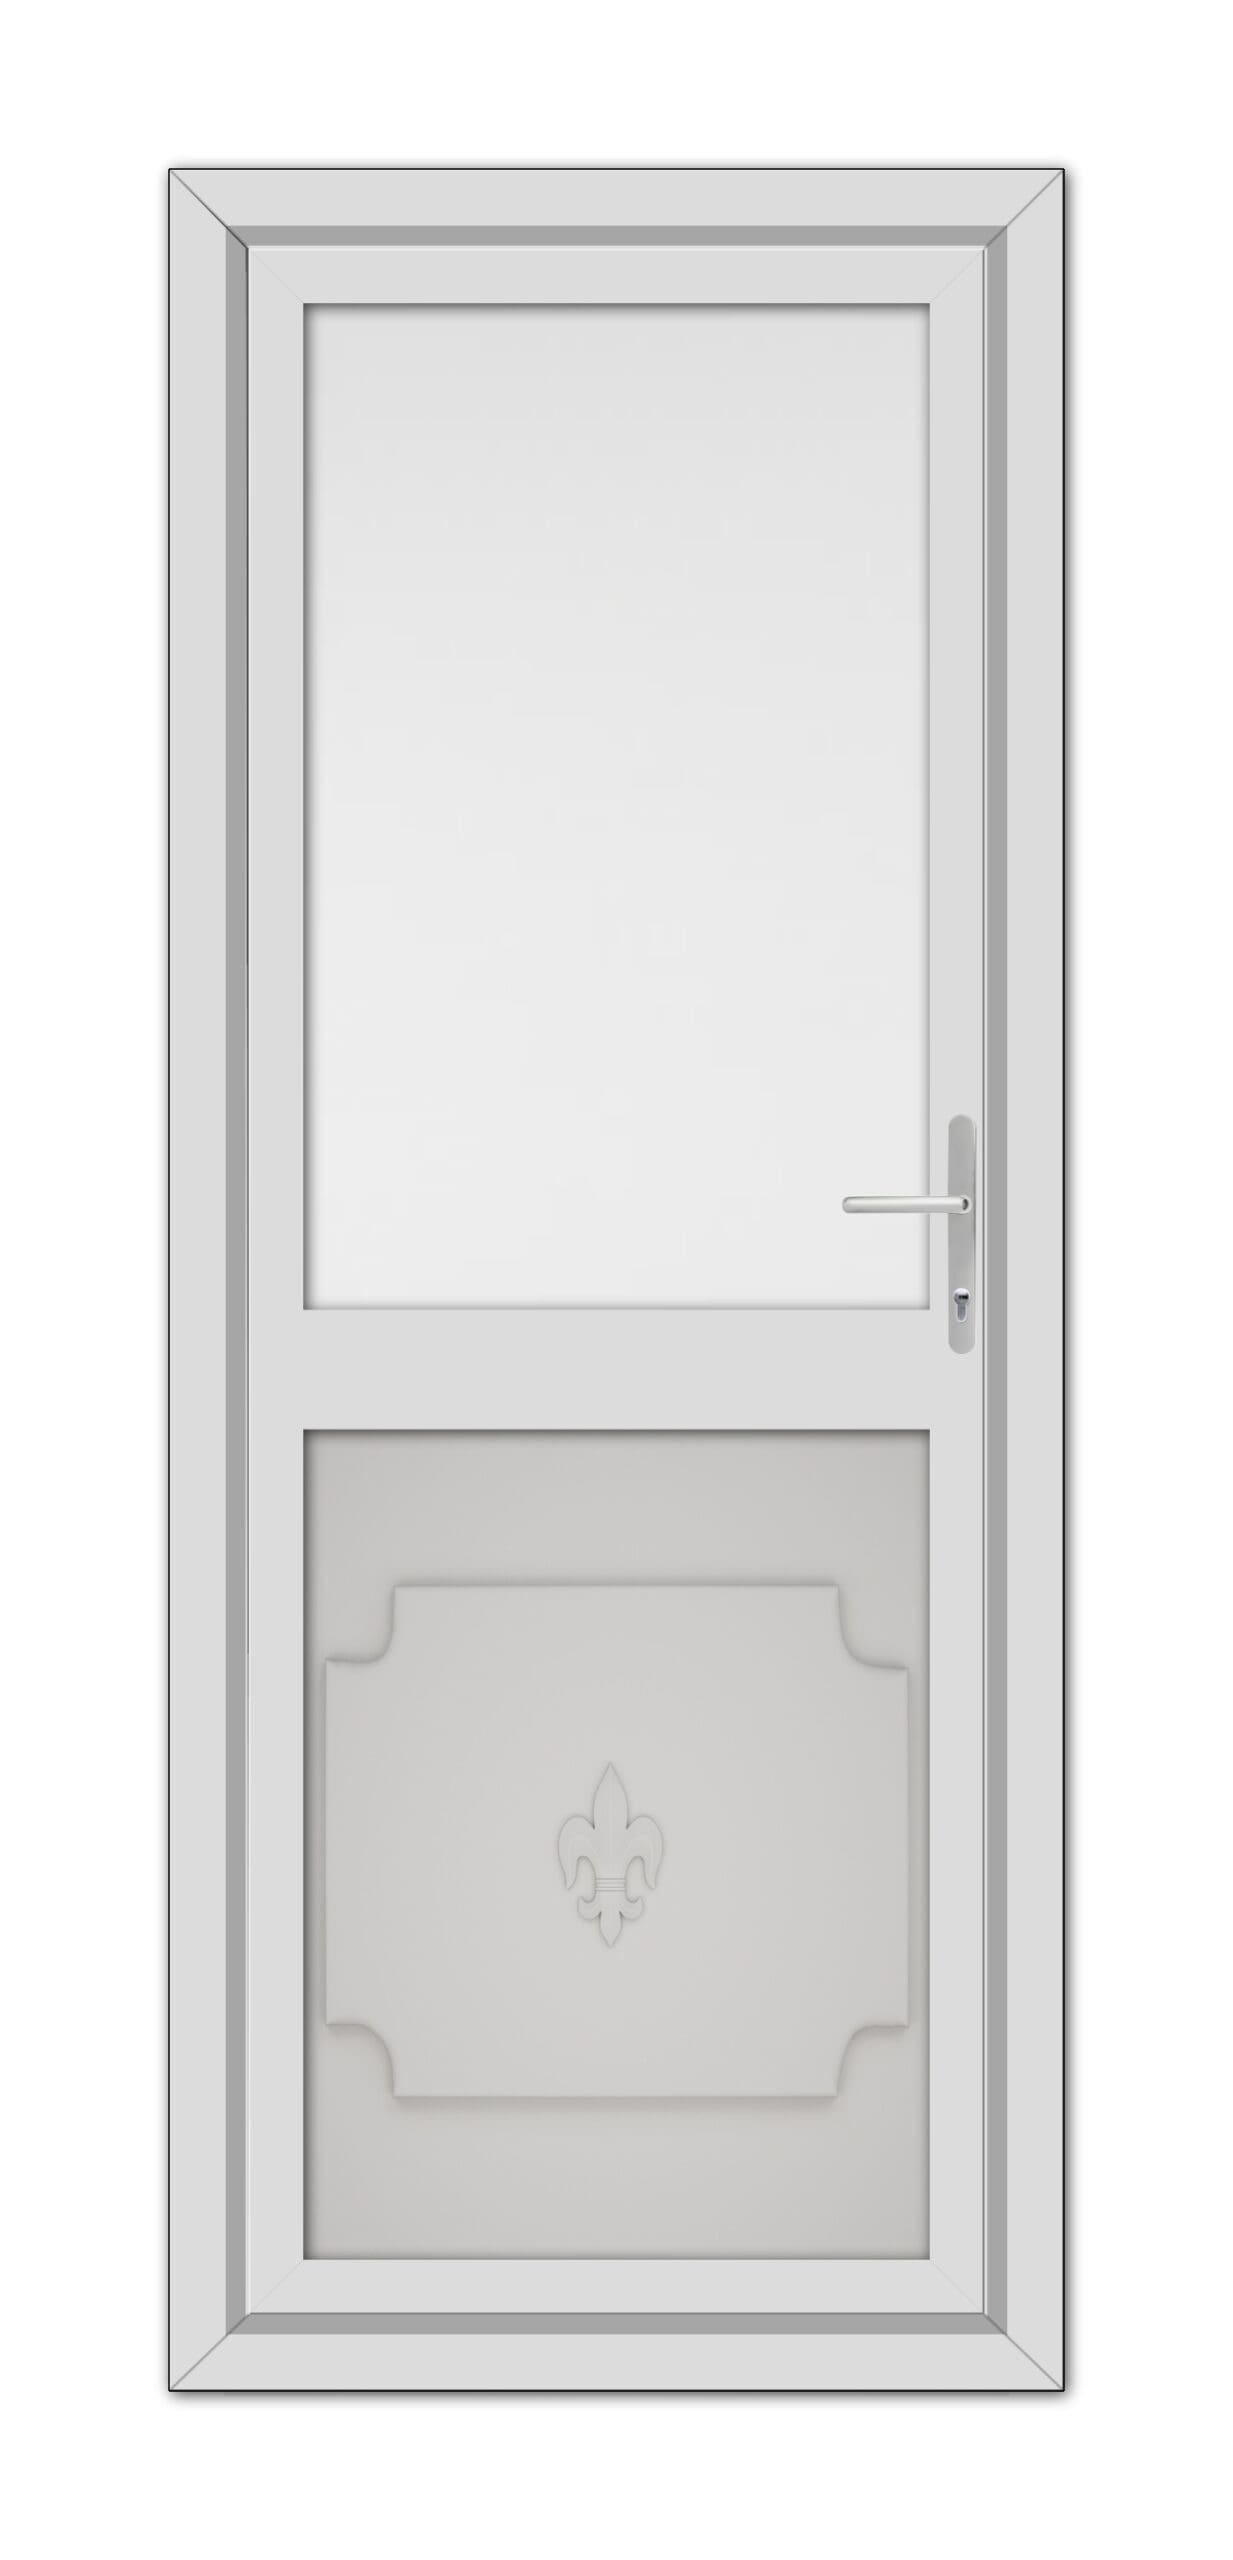 A Silver Grey Abbey Half uPVC Back Door with a decorative panel and a metal handle, set within a simple frame, viewed from the front.